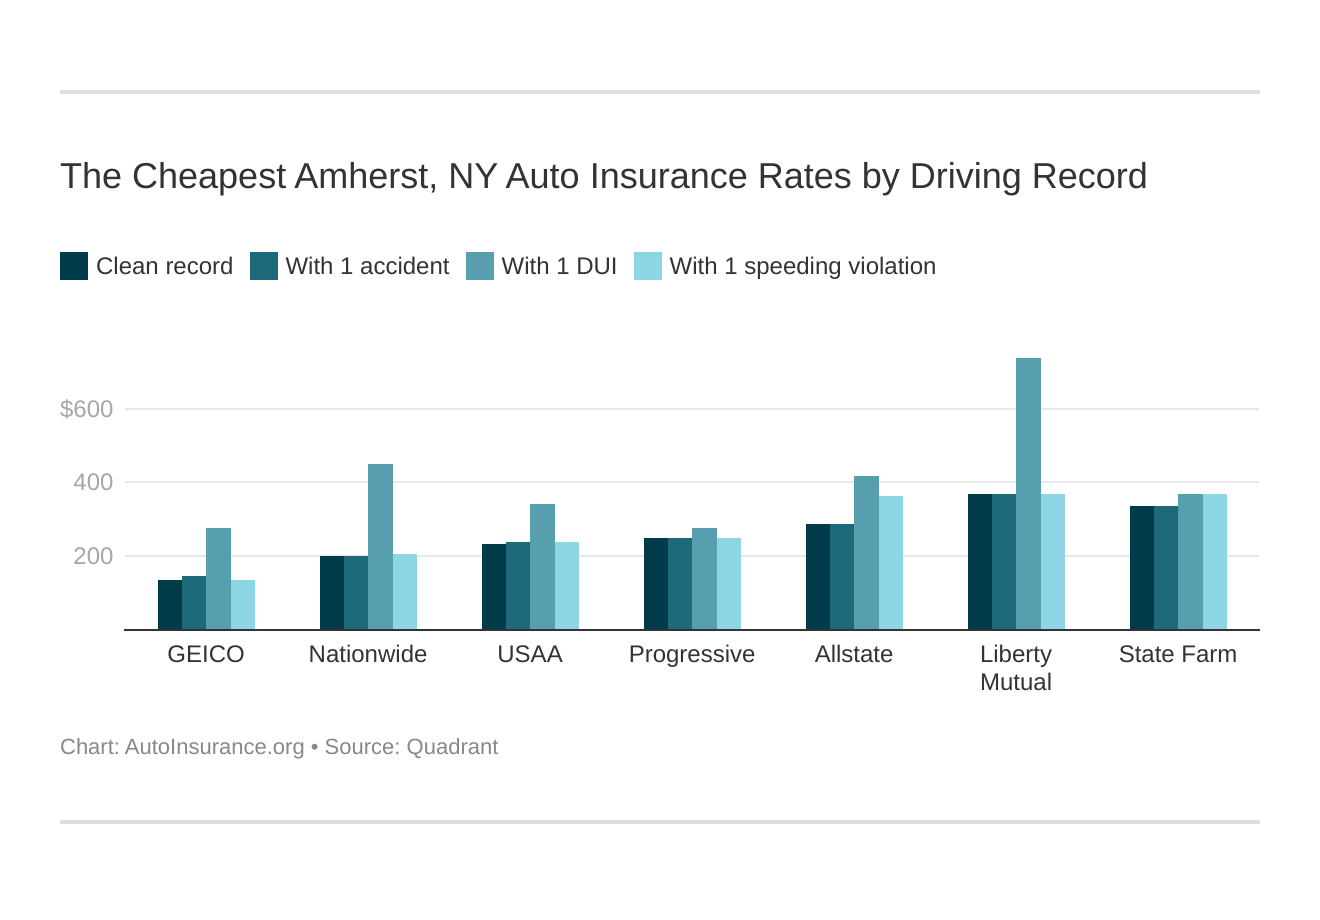 The Cheapest Amherst, NY Auto Insurance Rates by Driving Record